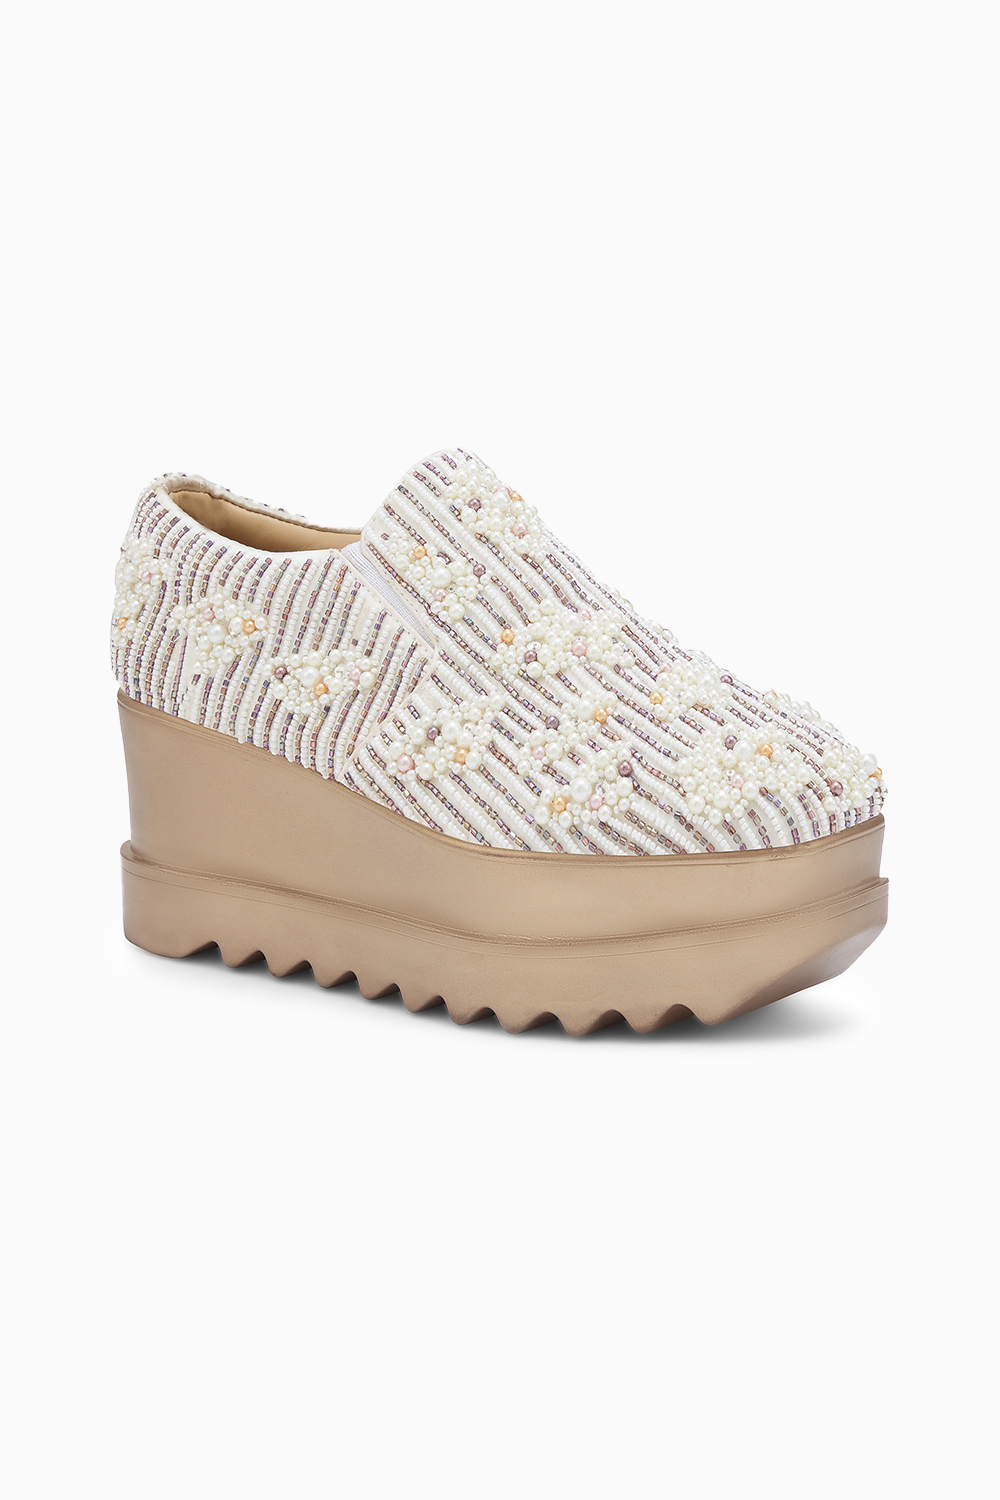 Candy Clouds Wedding Wedge Sneakers